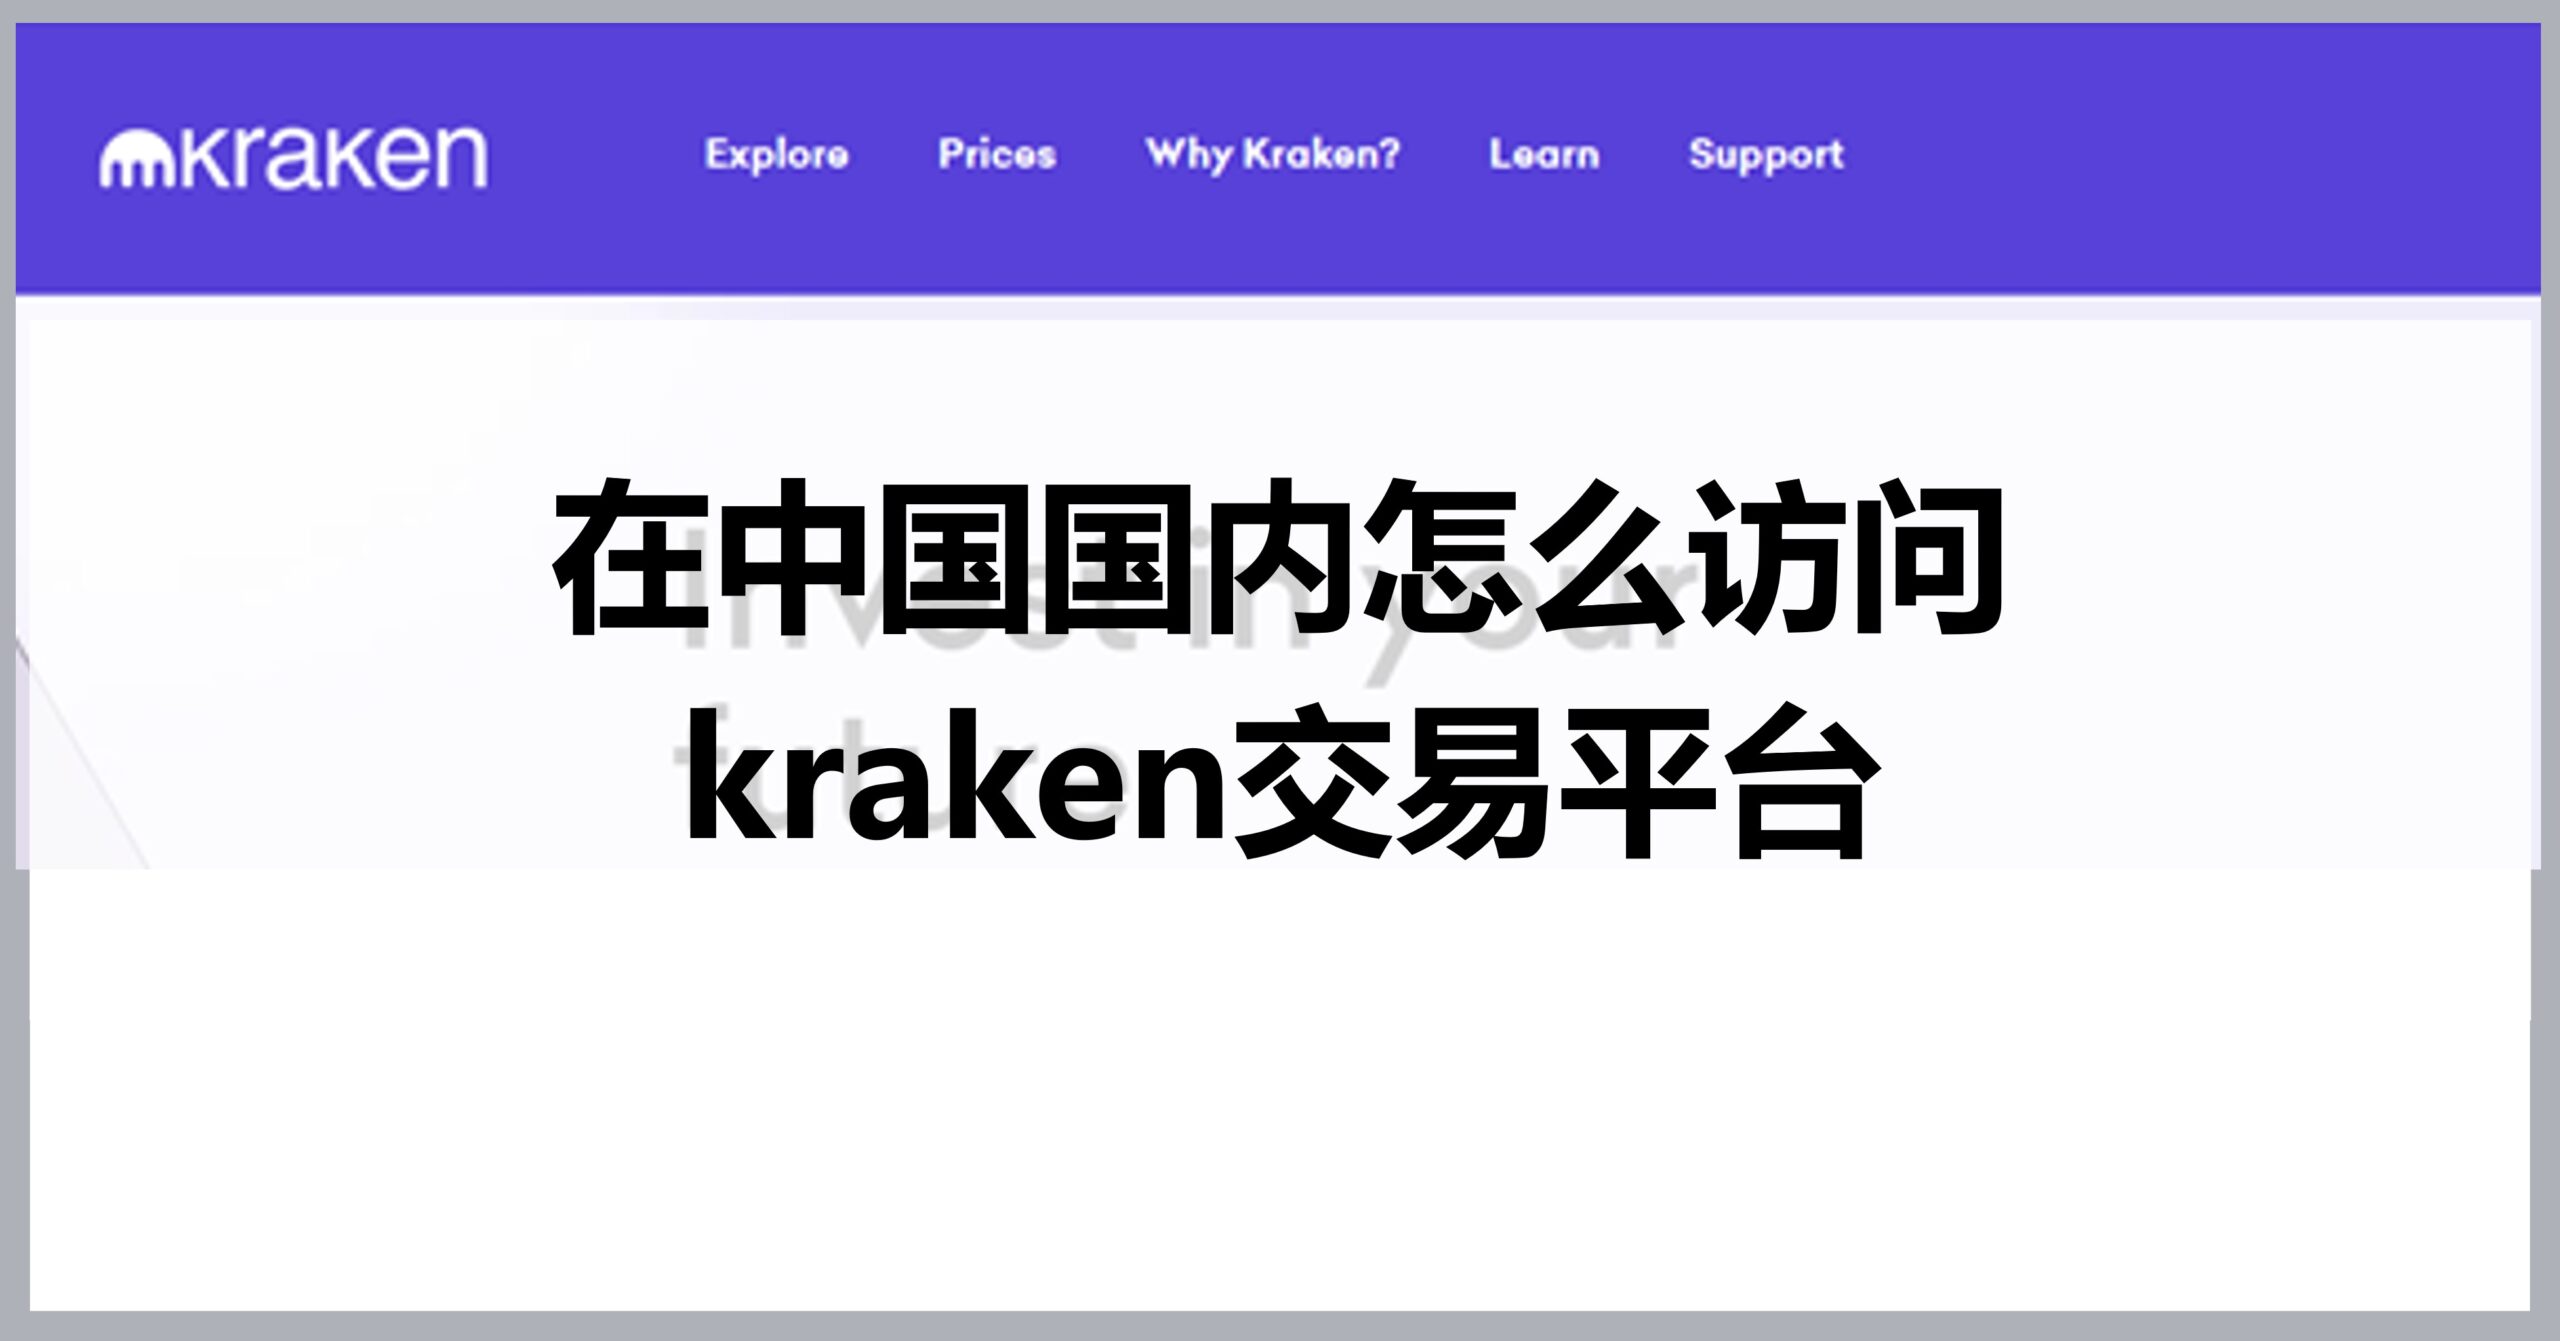 How to access Kraken in China